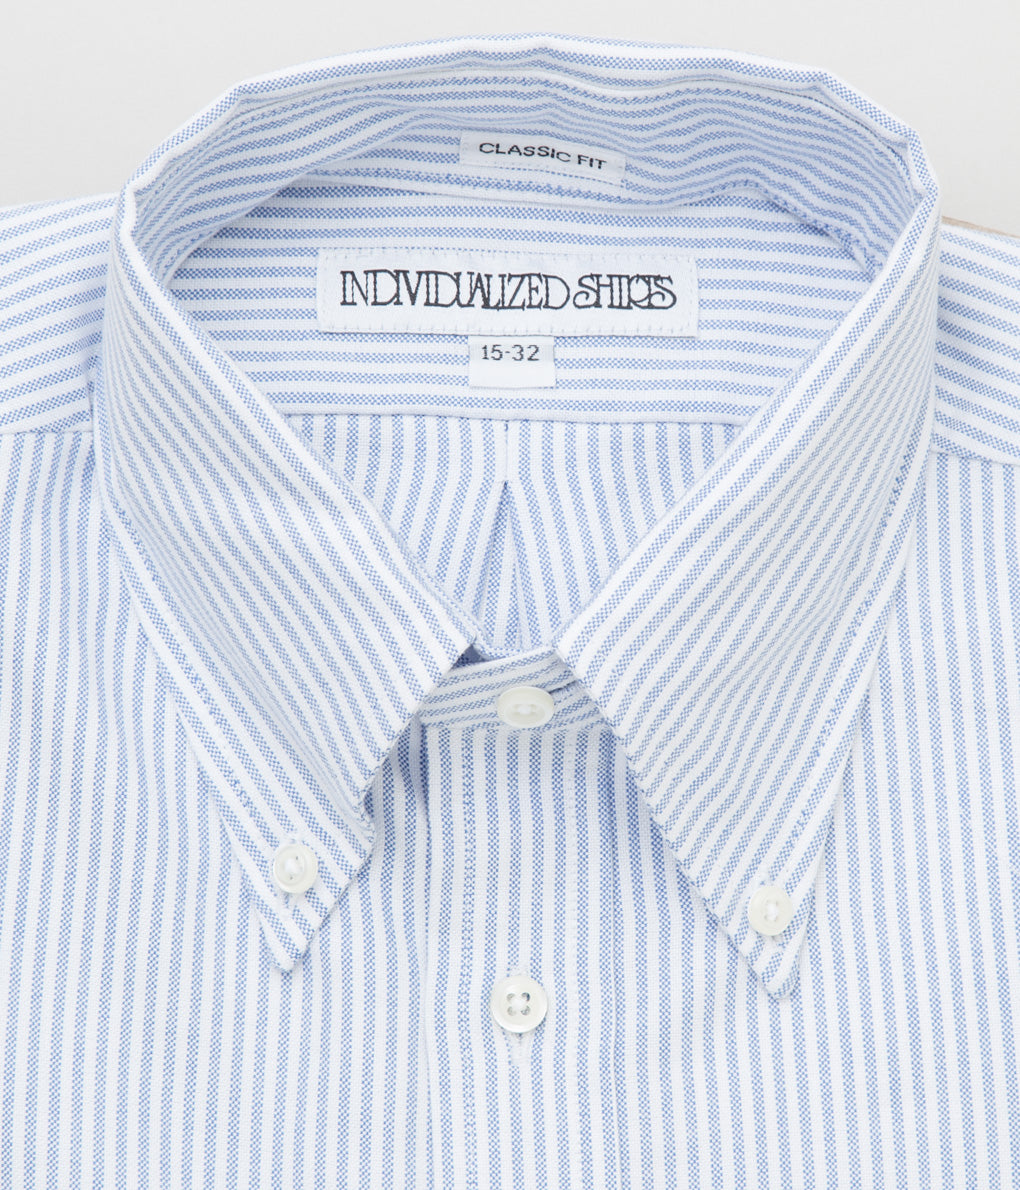 INDIVIDUALIZED SHIRTS "CANDY STRIPE (CLASSIC FIT BUTTON DOWN SHIRT)"(LIGHT BLUE)